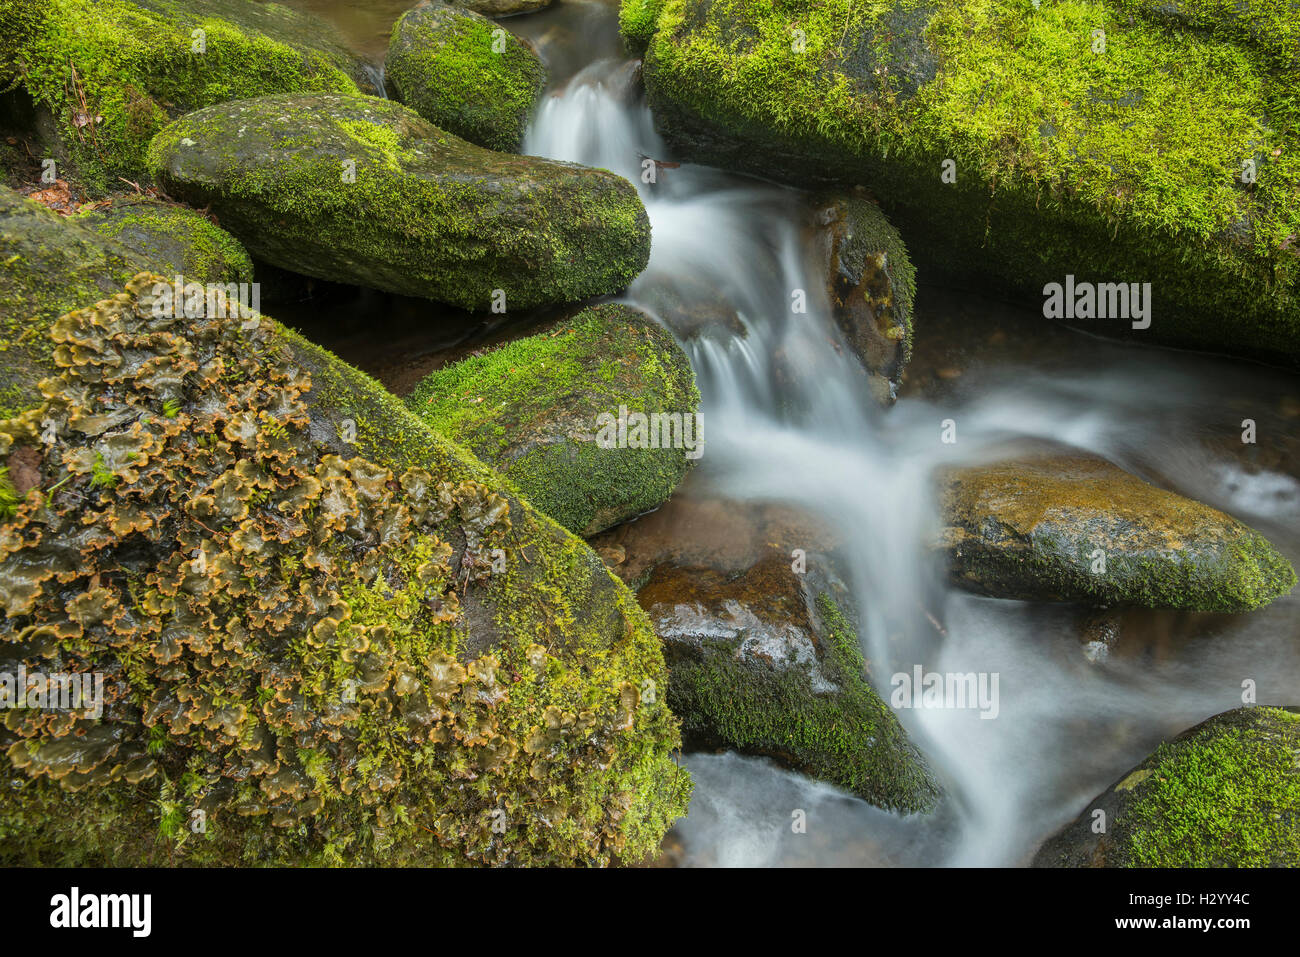 Tiny stream and falls, surrounded by mossy boulders, Great Smoky Mountains National Park, Tennessee, USA Stock Photo